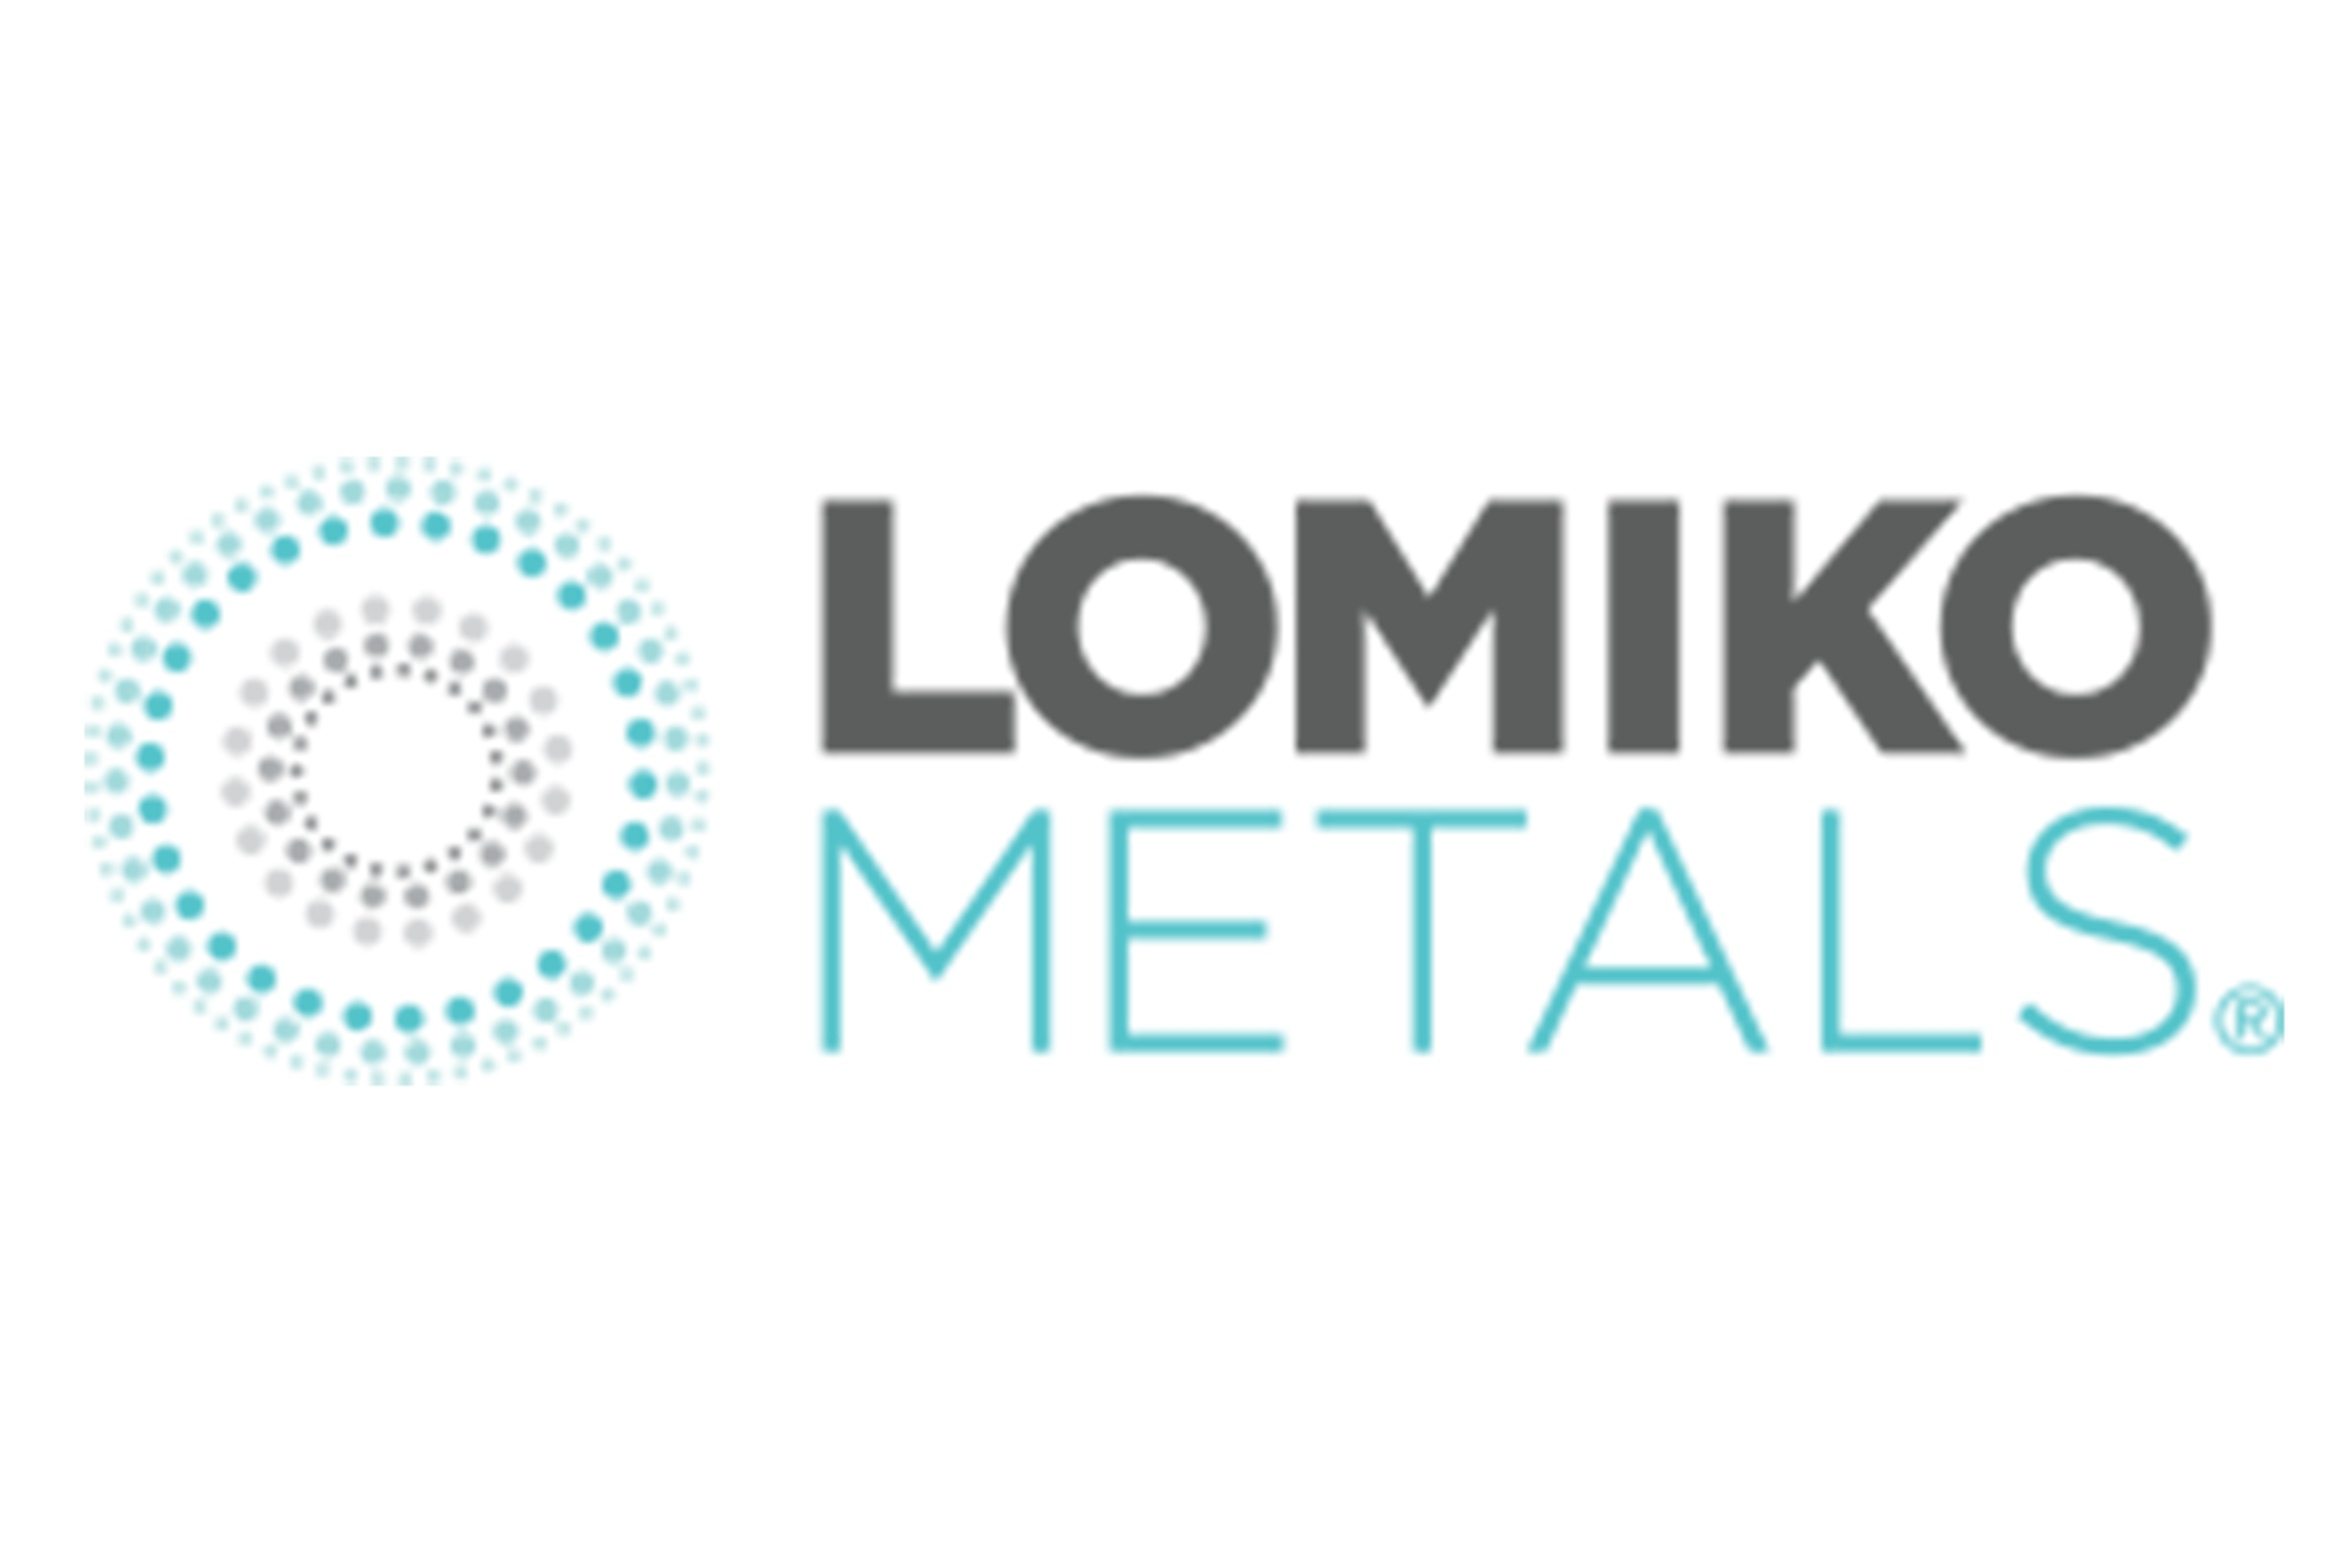 Lomiko Announces Positive Results on its Initial Metallurgical Test Programs at its La Loutre Graphite Project with Results Indicating Purity of Greater Than 99.9% C